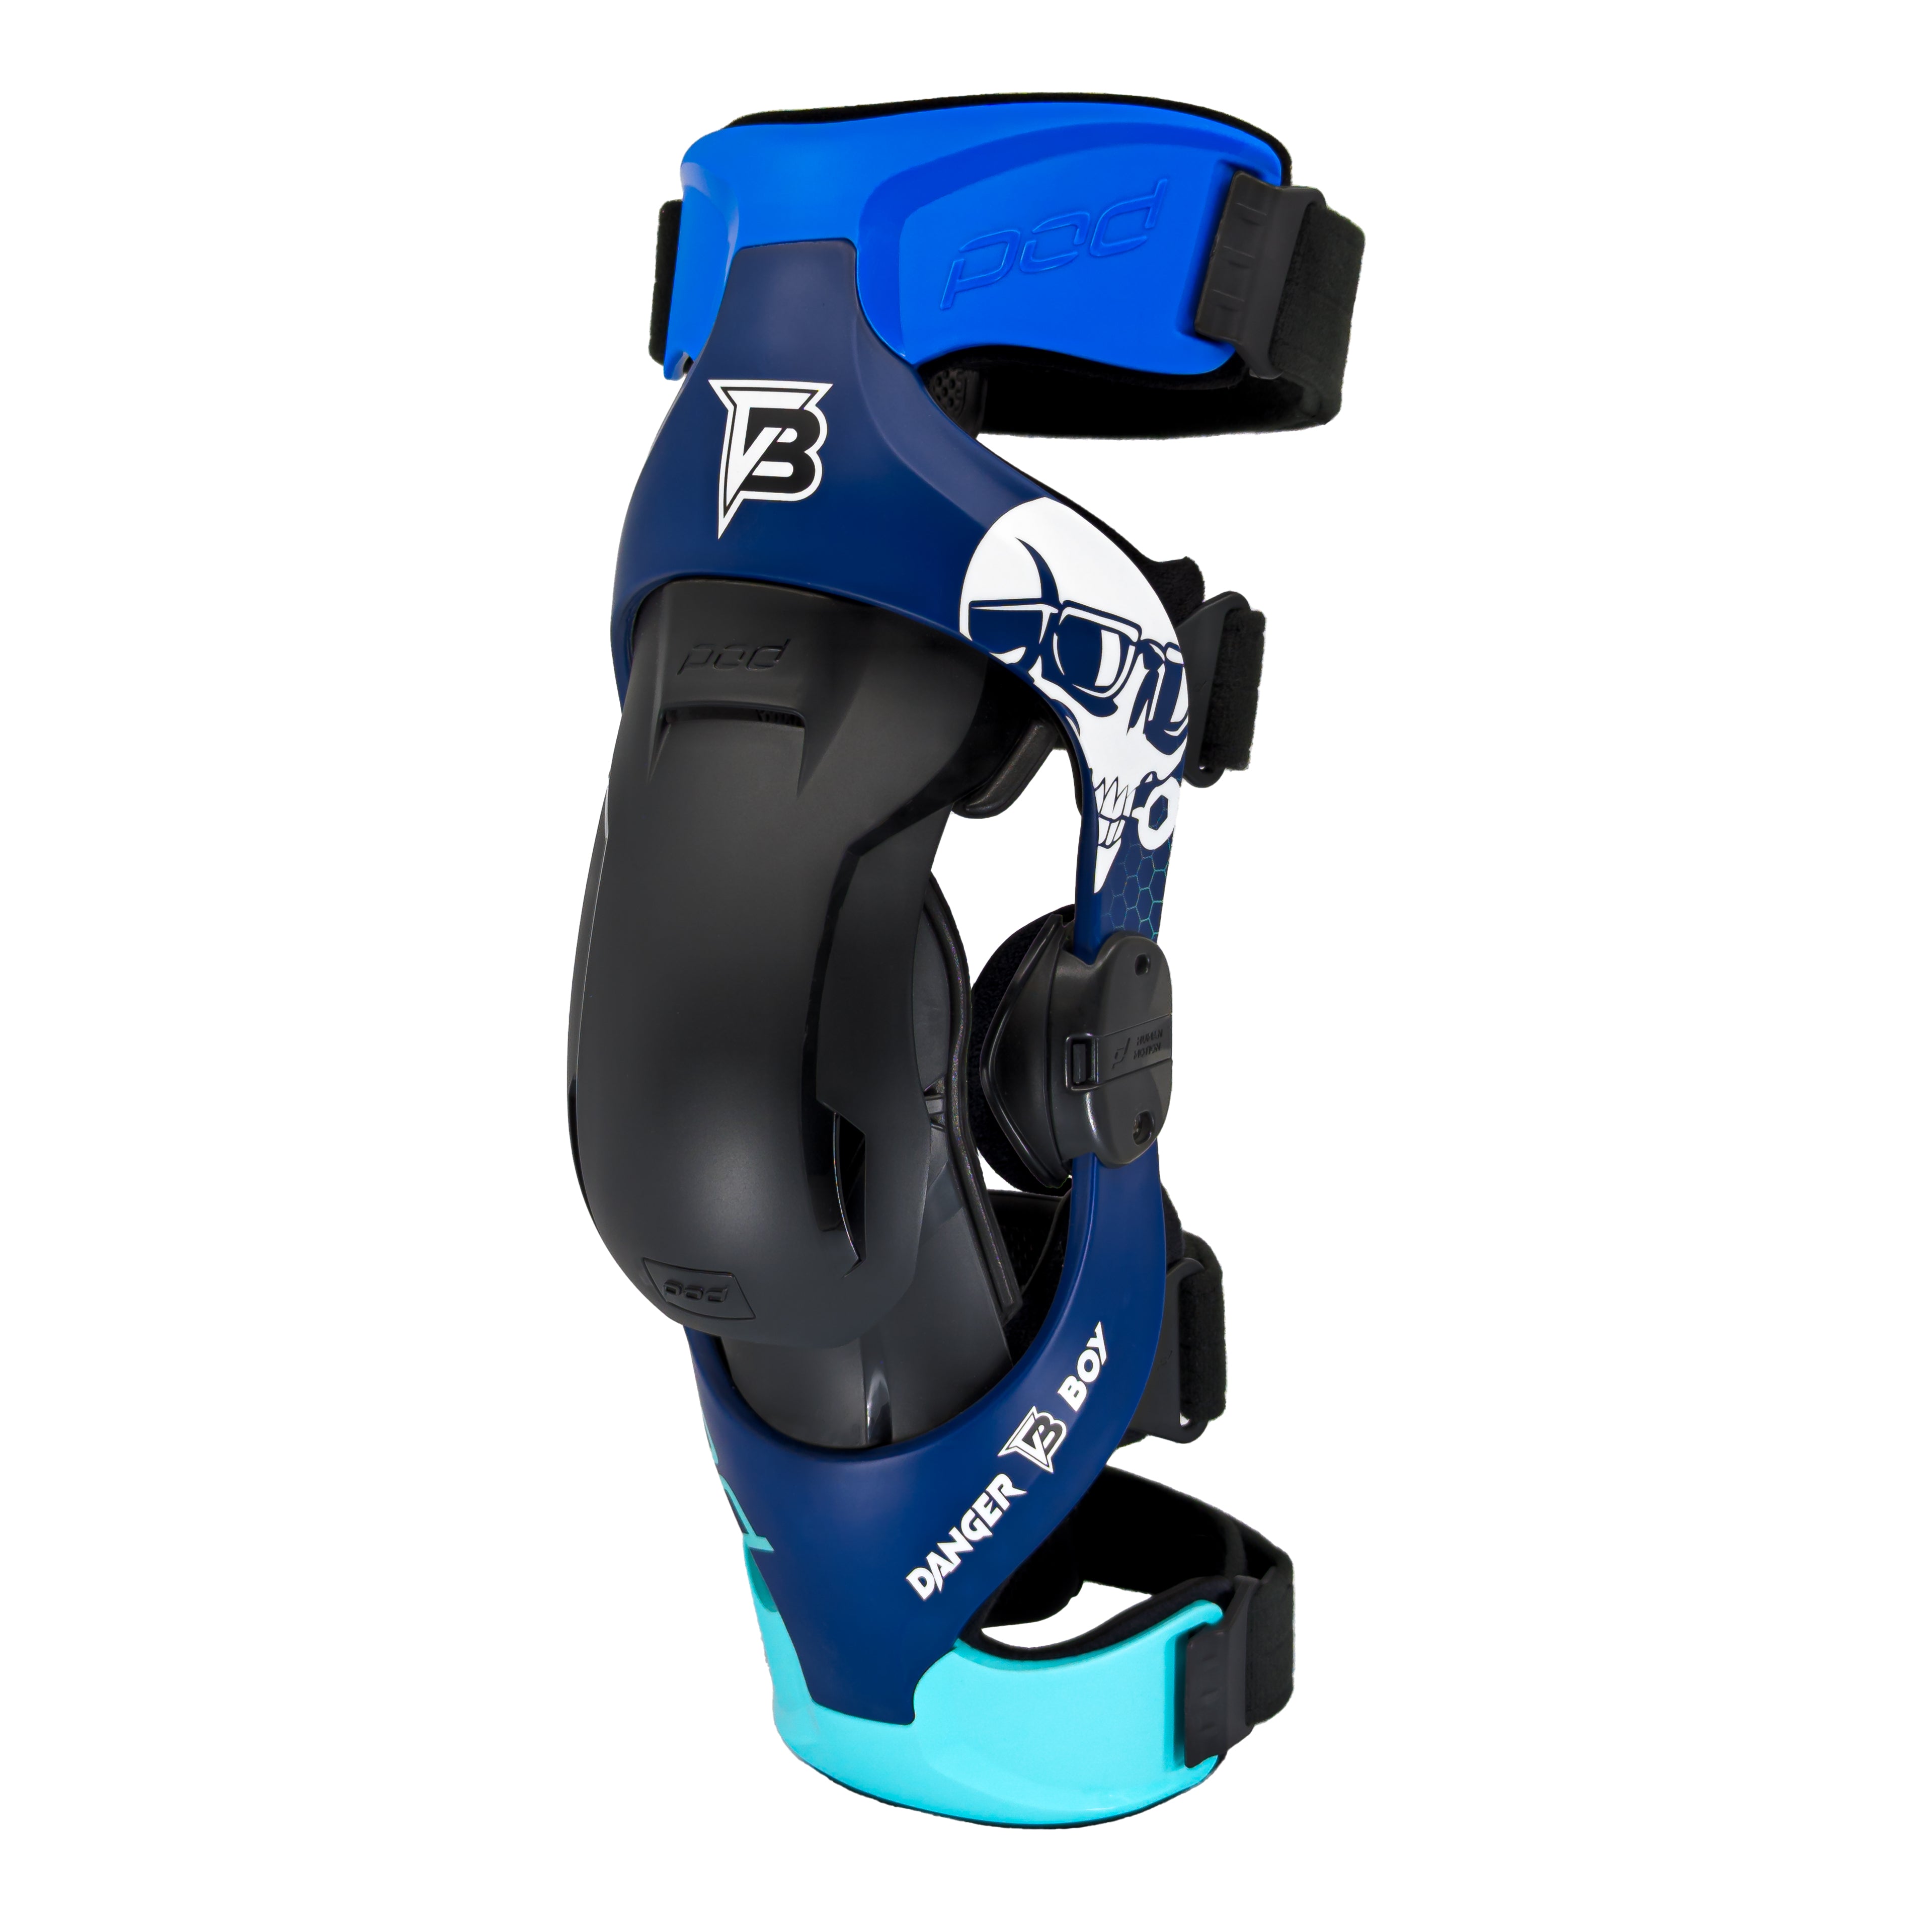 K4 2.0 Knee Brace DB238 in size XS/SM, pair, showing frontal and side views on a white background.